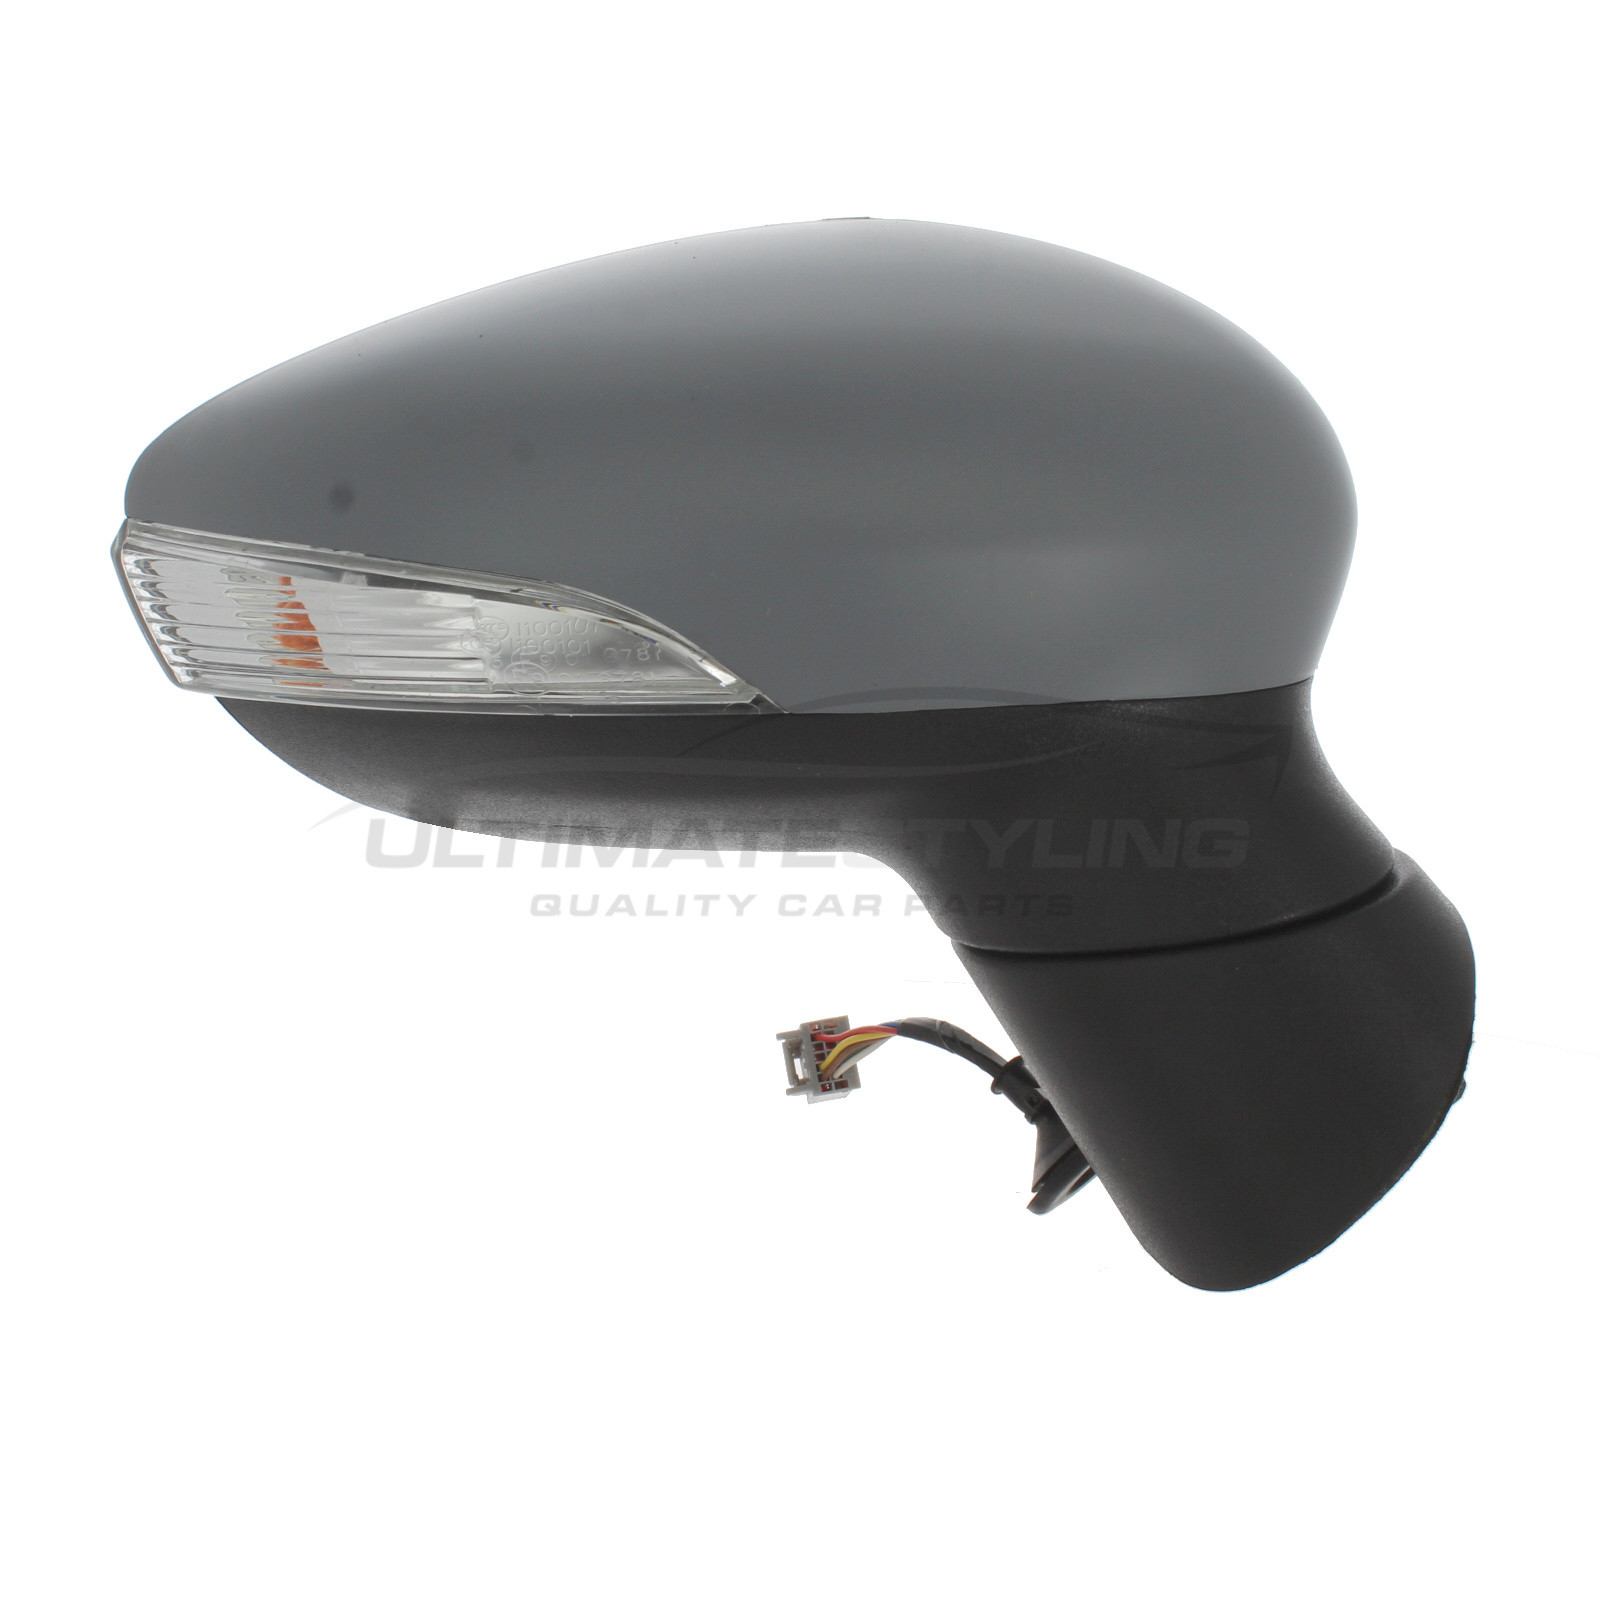 Ford Fiesta Wing Mirror / Door Mirror - Drivers Side (RH) - Electric adjustment - Heated Glass - Indicator - Primed